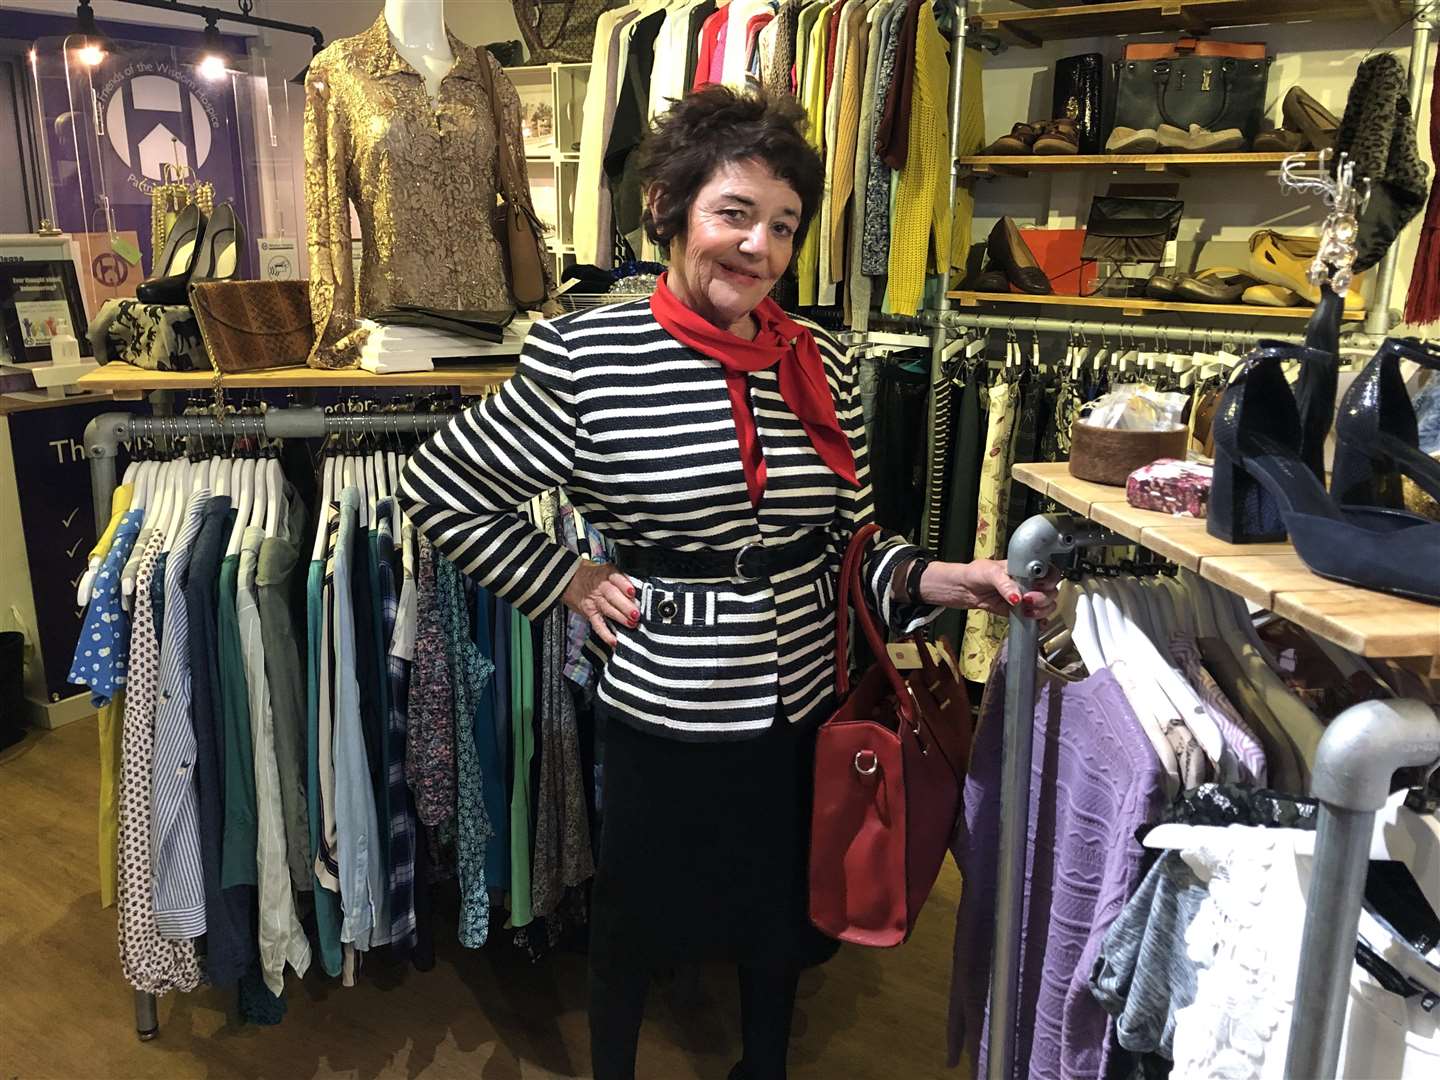 Reporter Nicola Jordan got a charity shop makeover with a budget of £50